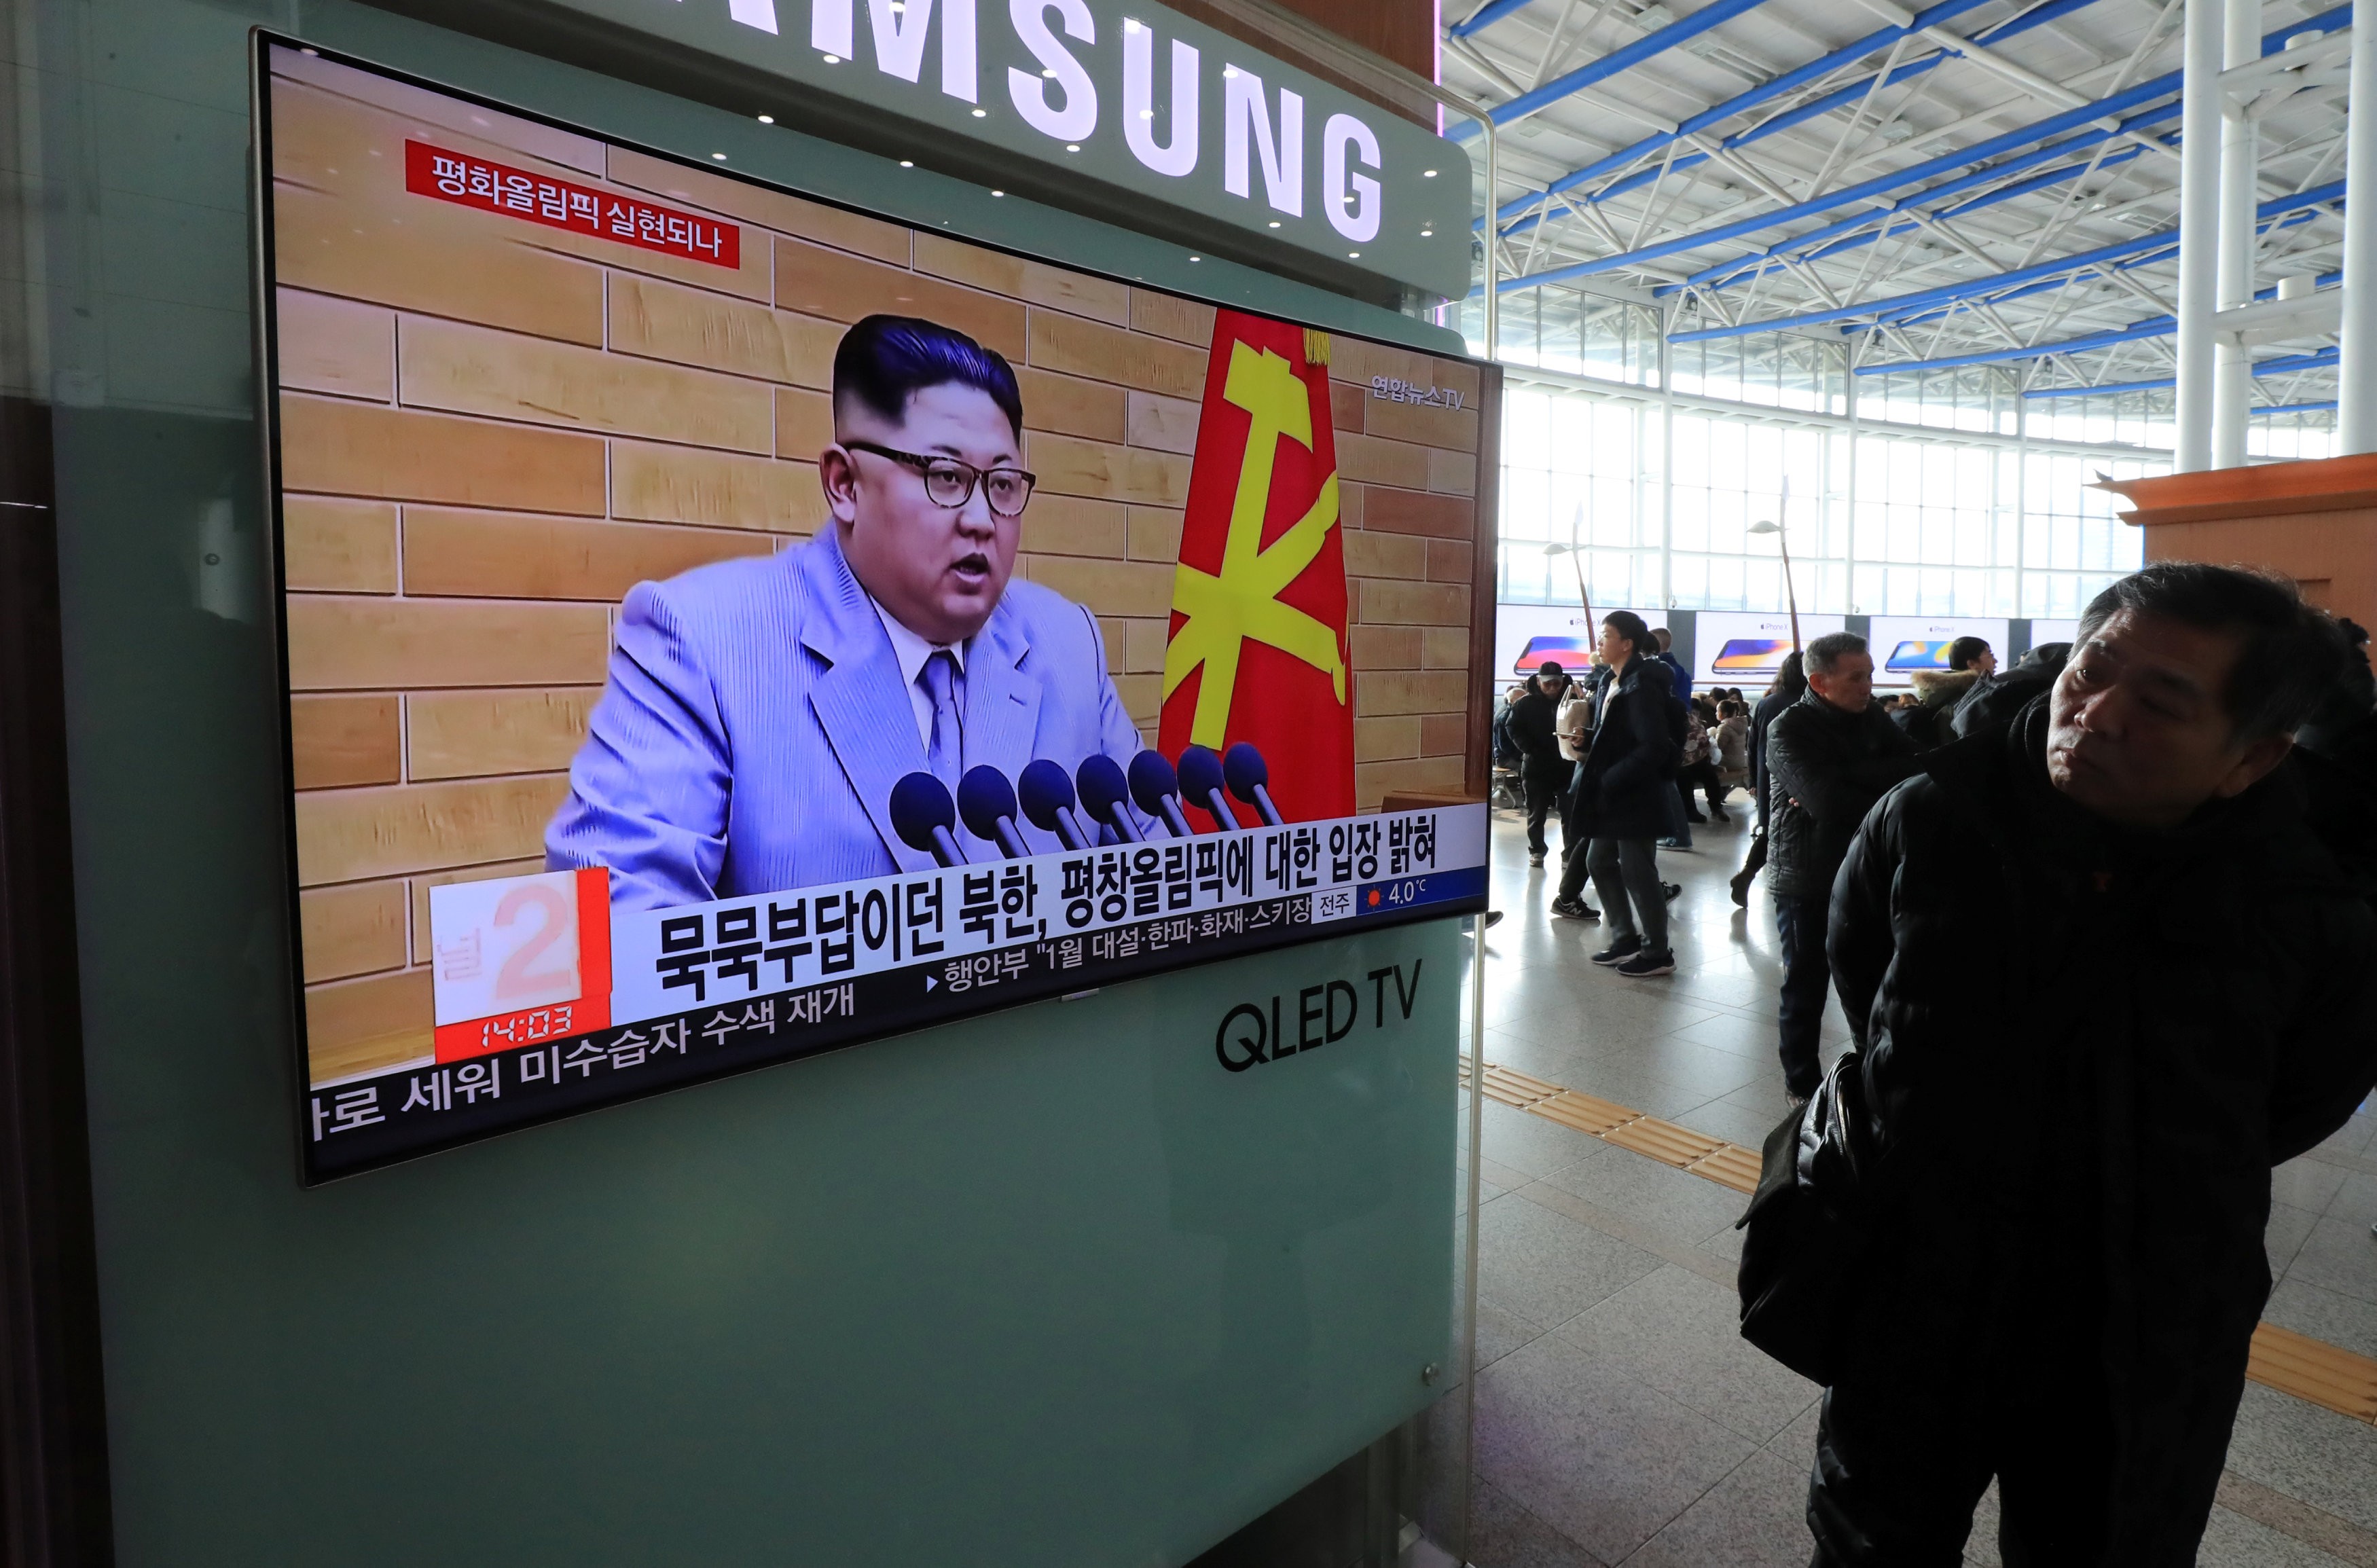 Seoul residents watch a news report on North Korean leader Kim Jong-un’s New Year’s Day speech. Photo: Yonhap via Reuters